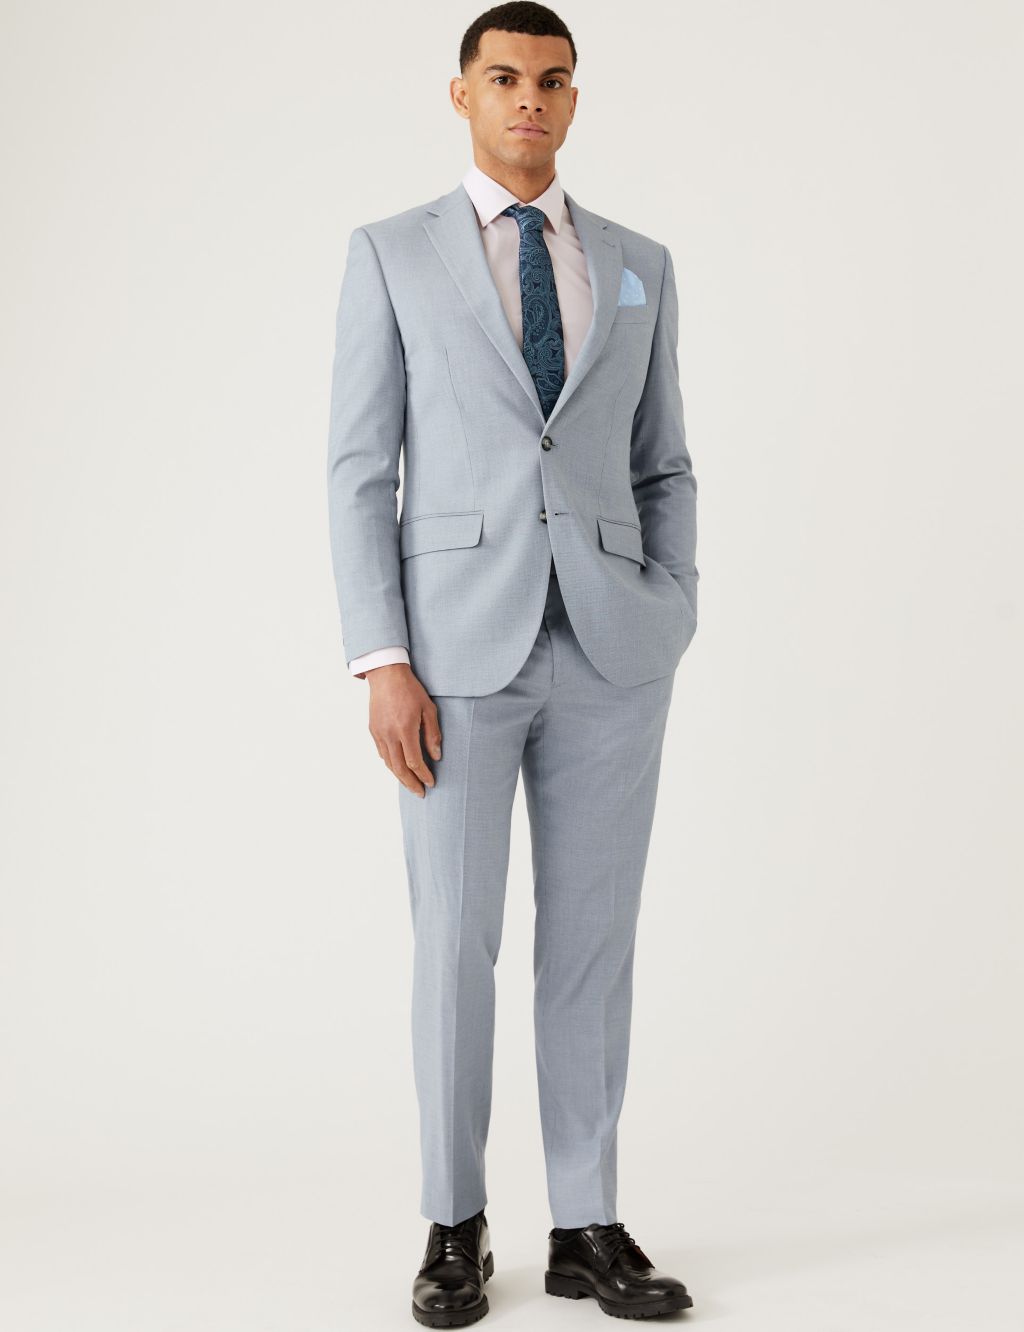 Slim Fit Puppytooth Suit image 1